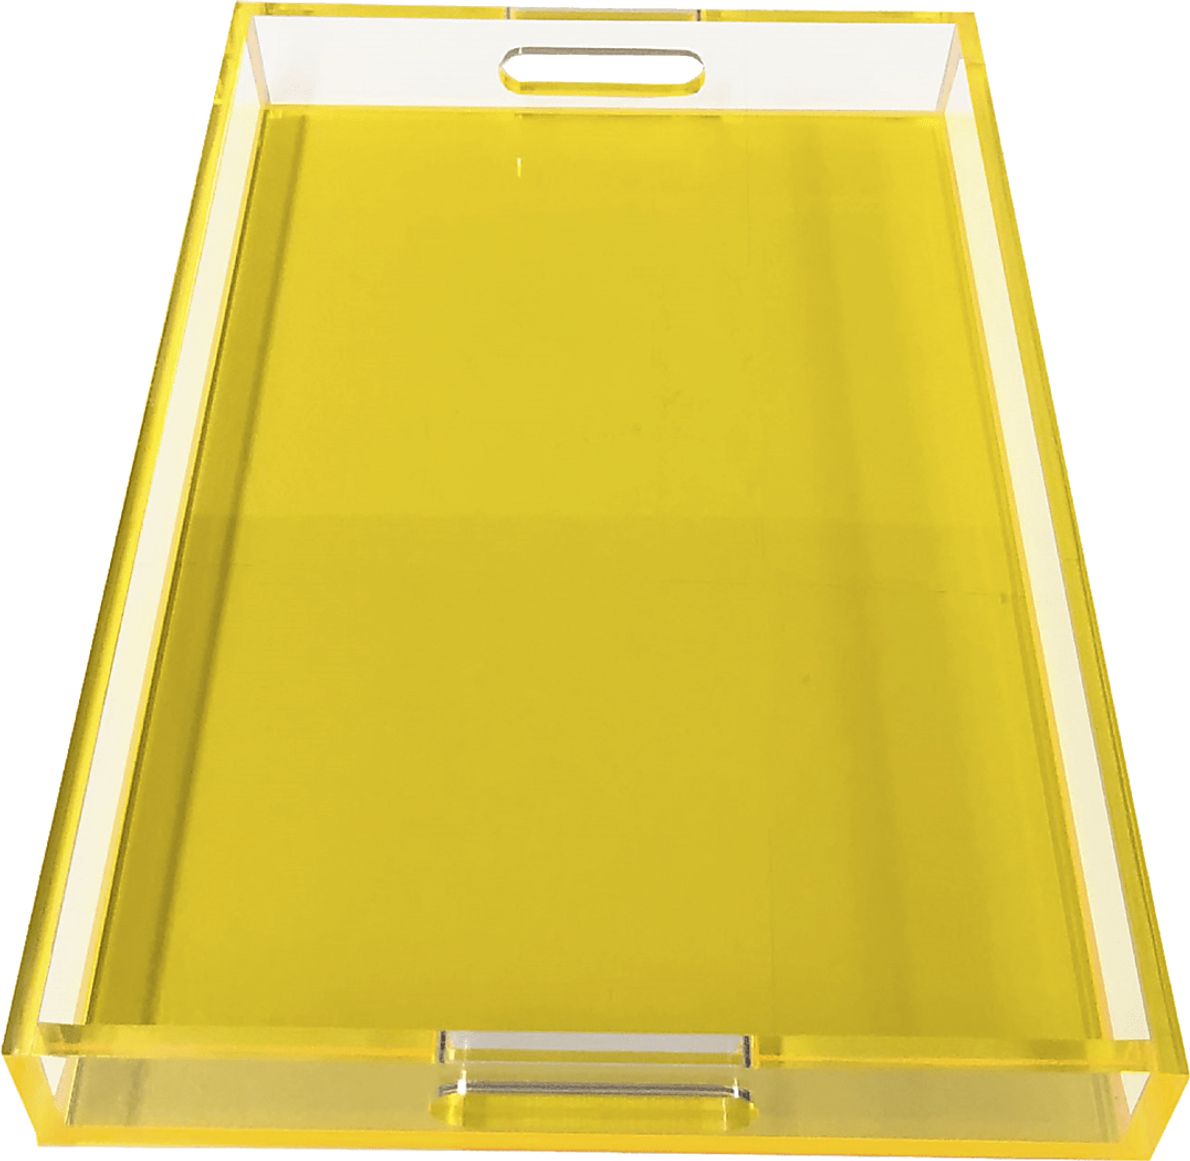 Roseware Yellow Tray - Rooms To Go